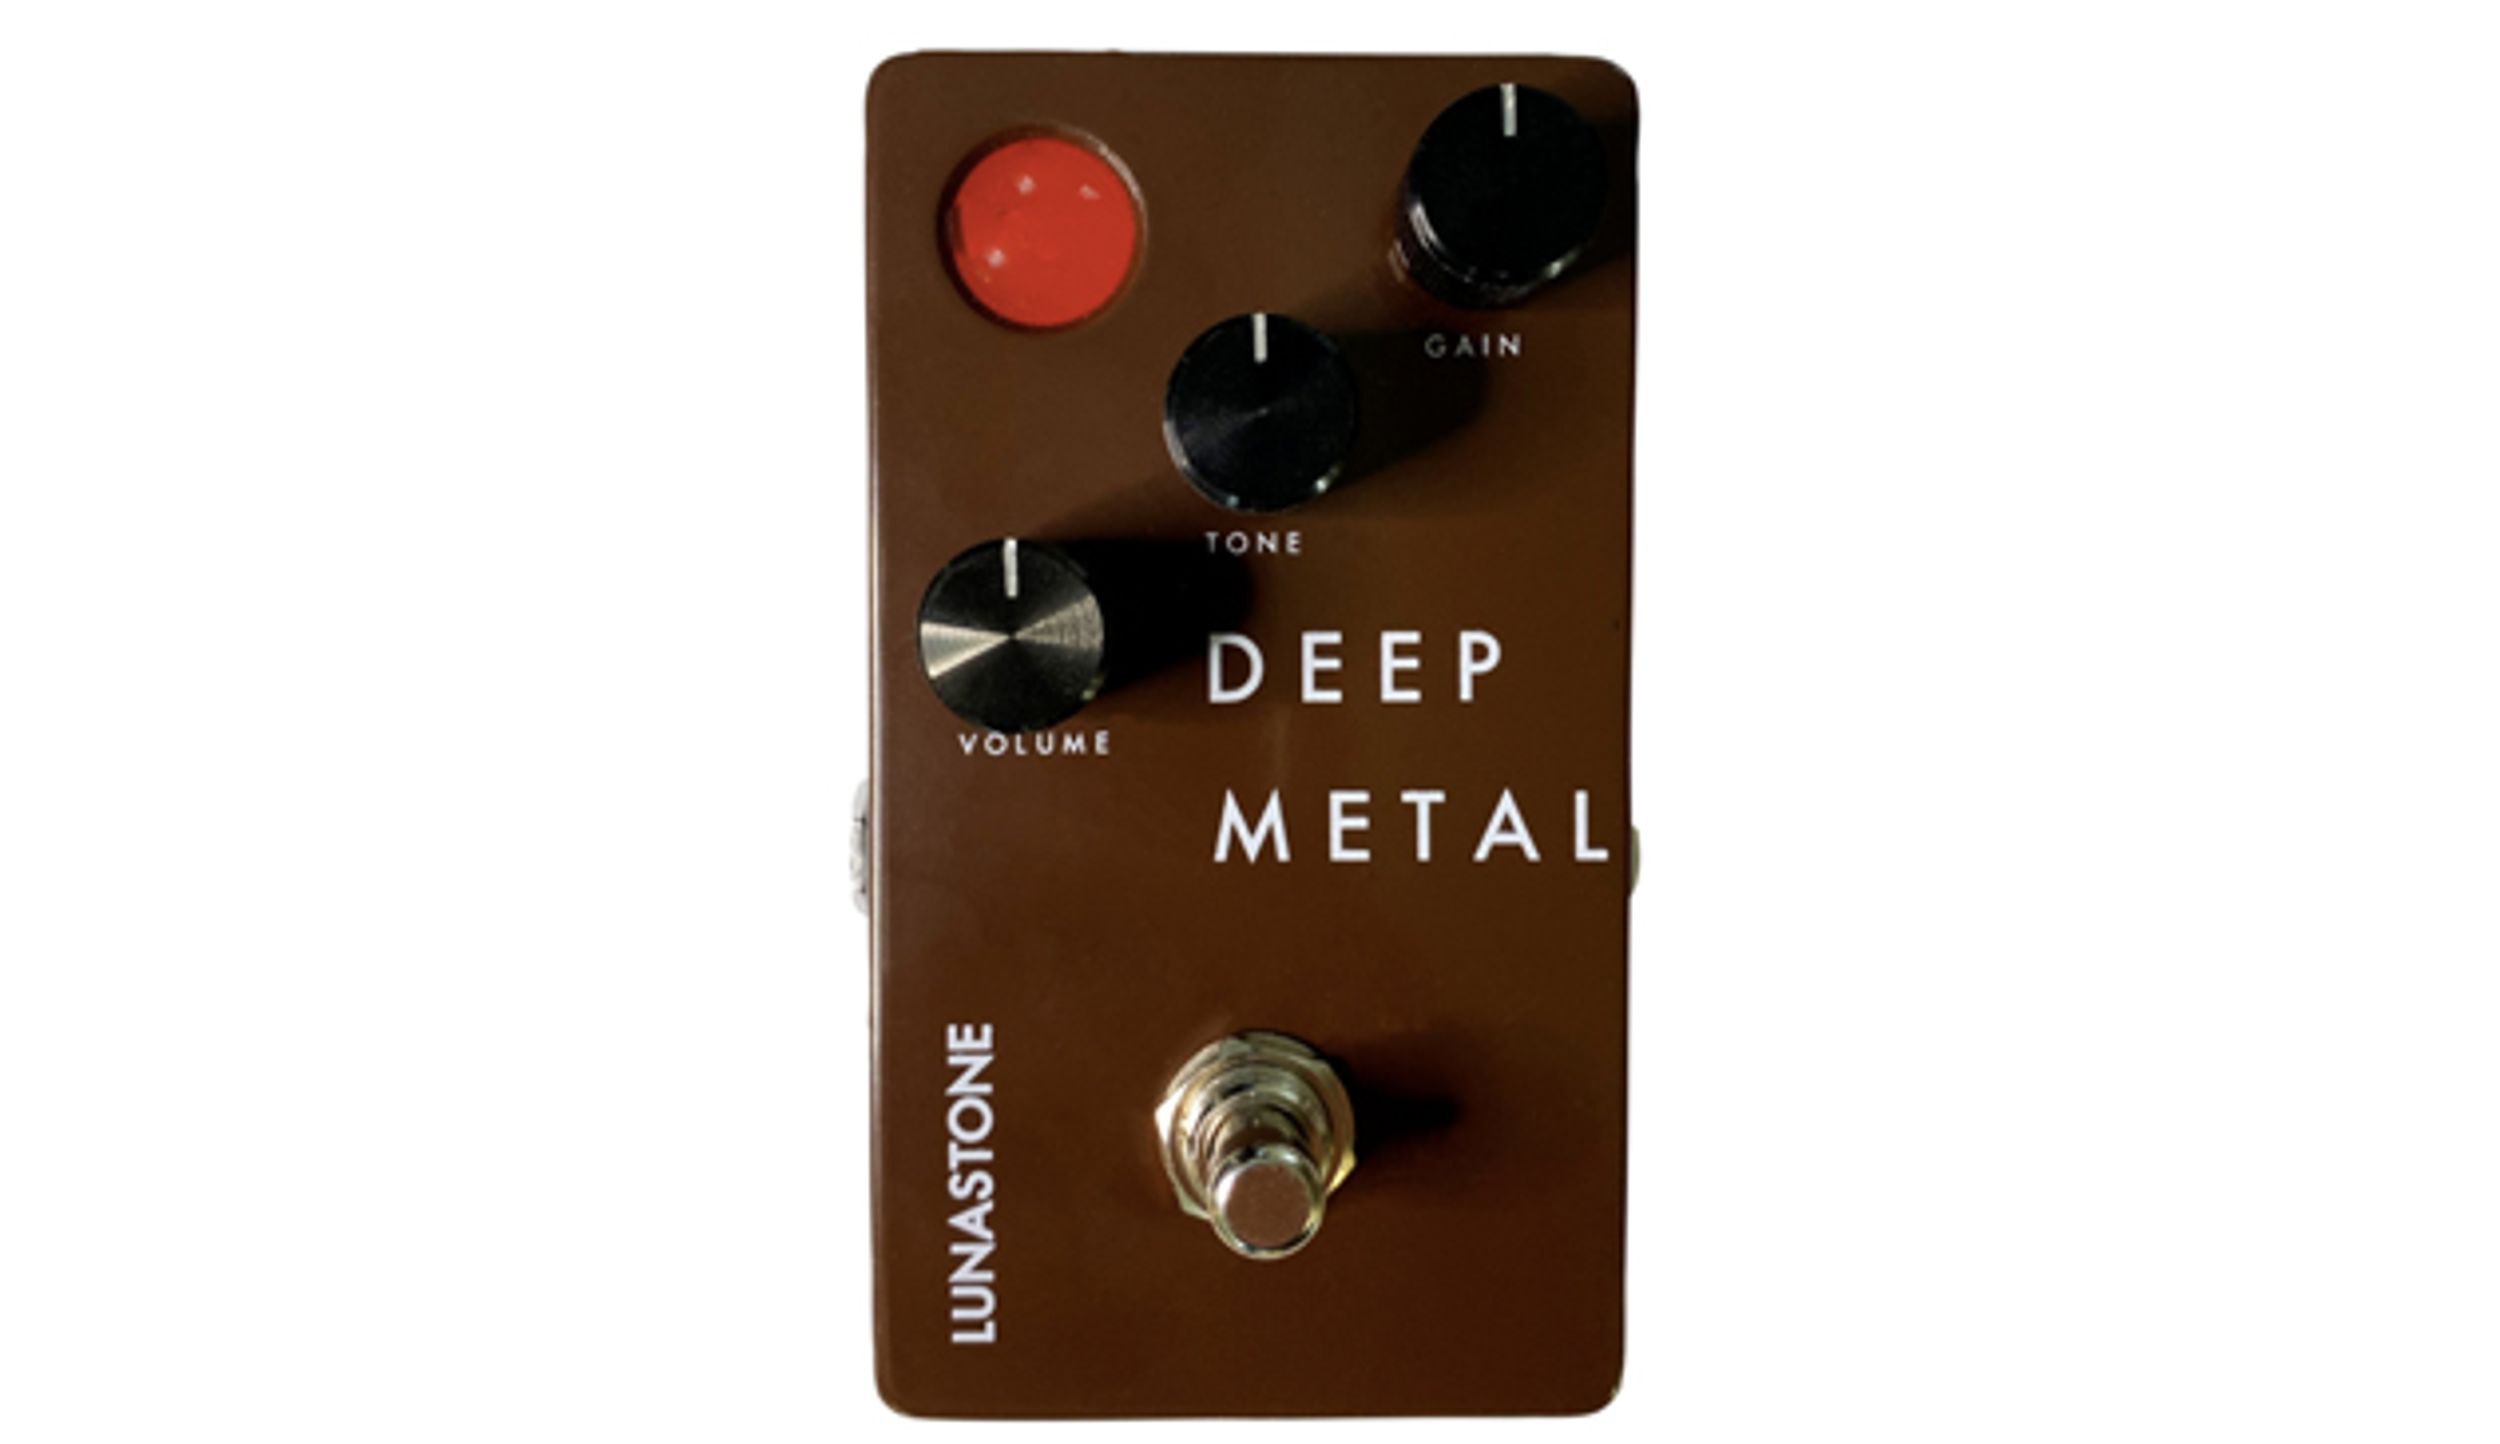 Lunastone Adds Infinite Power to the Table with Deep Metal Distortion Pedal